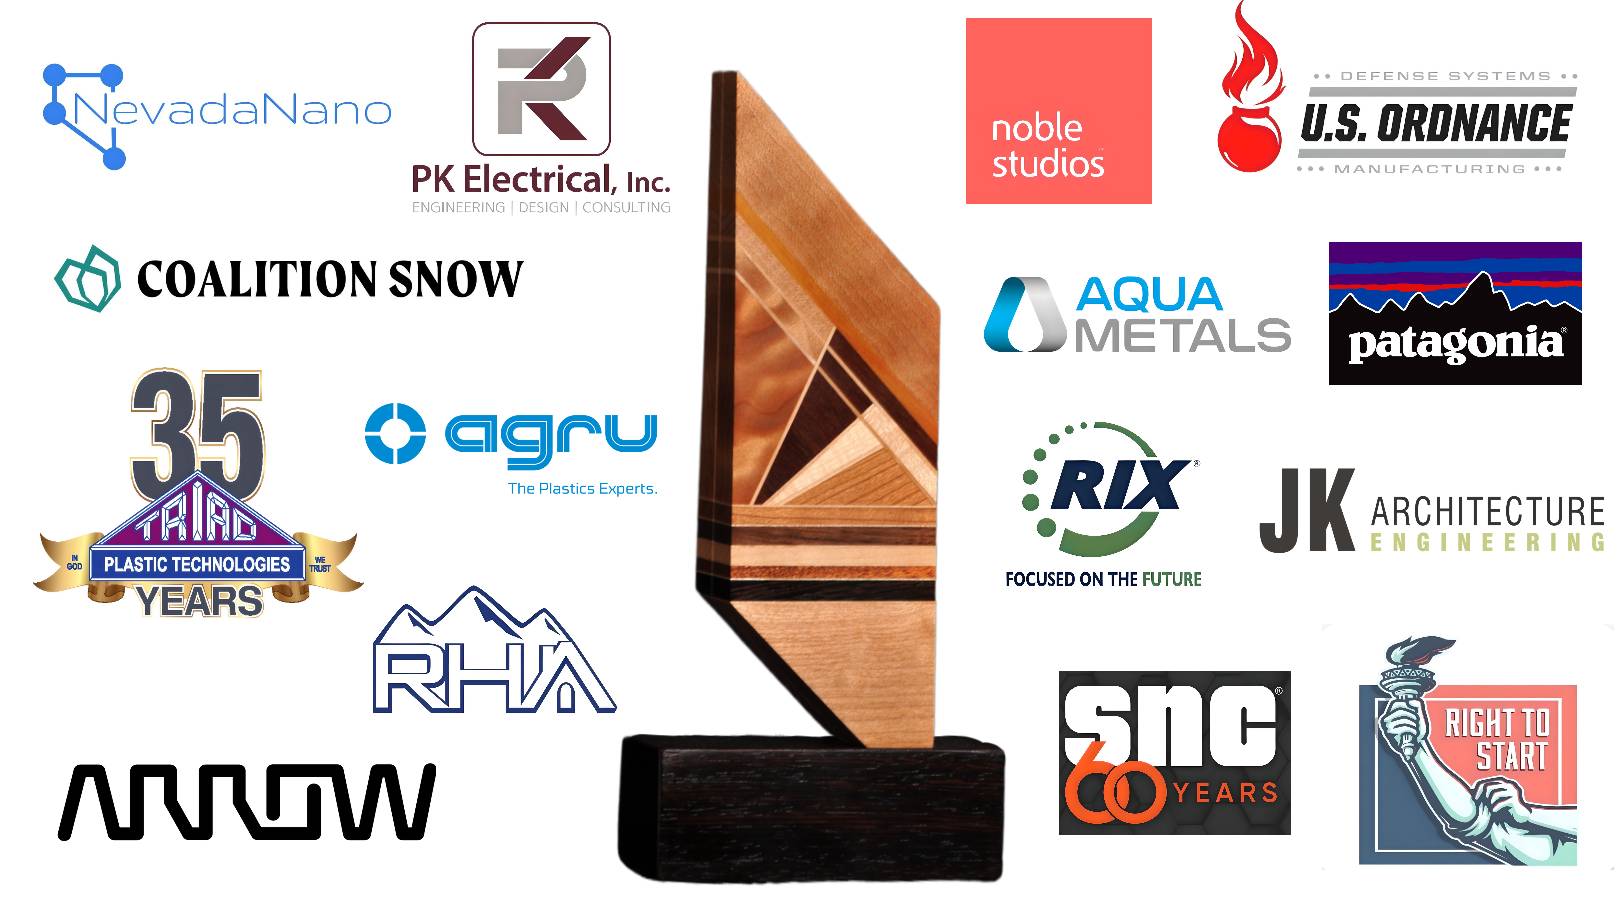 Featured image showing the winning company logos placed around the EIA handcrafted wood award.